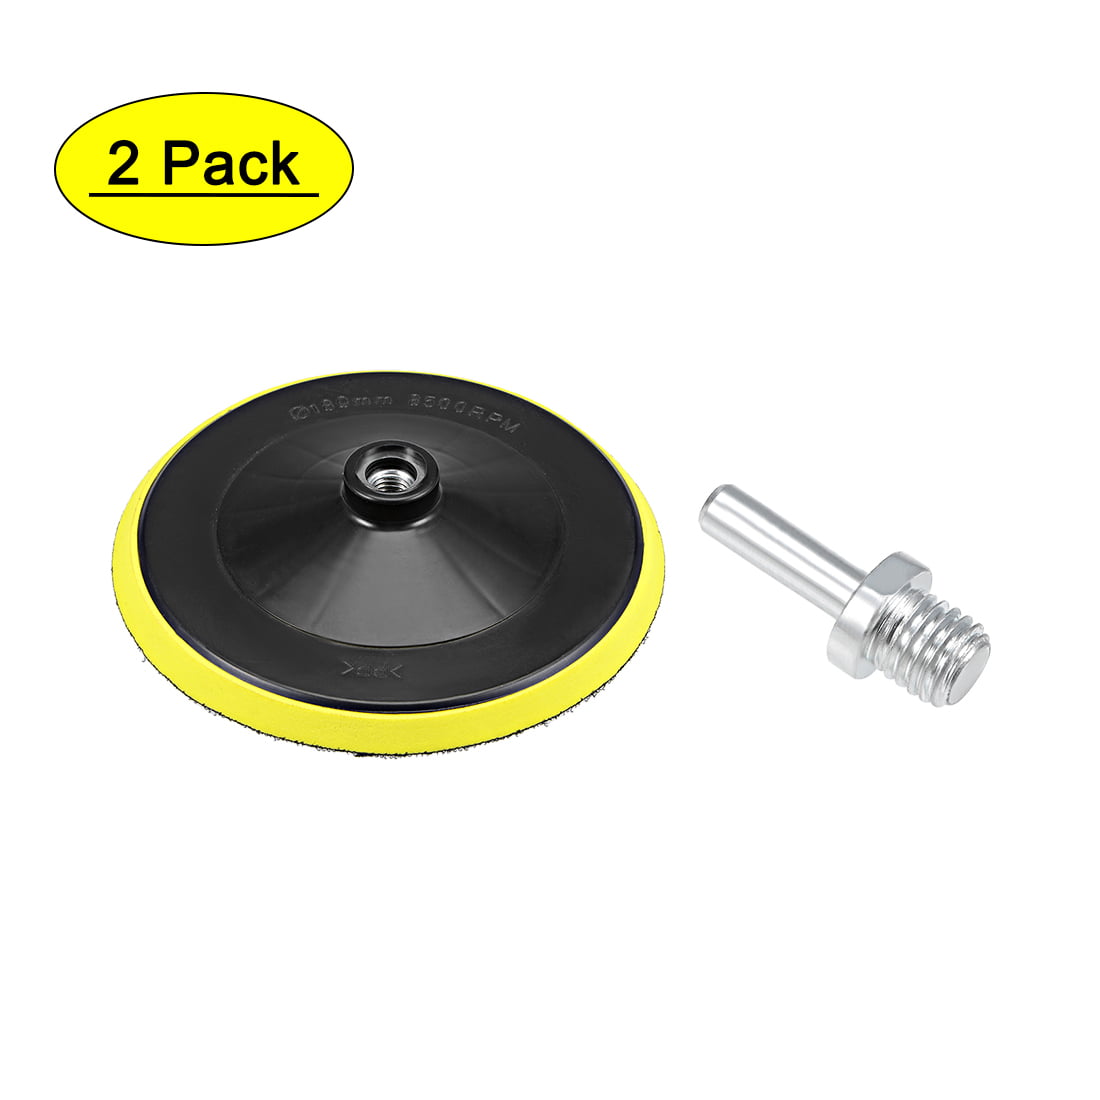 6 Inch M14 Hook And Loop Rubber Disc Backing Pad For Grinder Polisher Sanding*1 